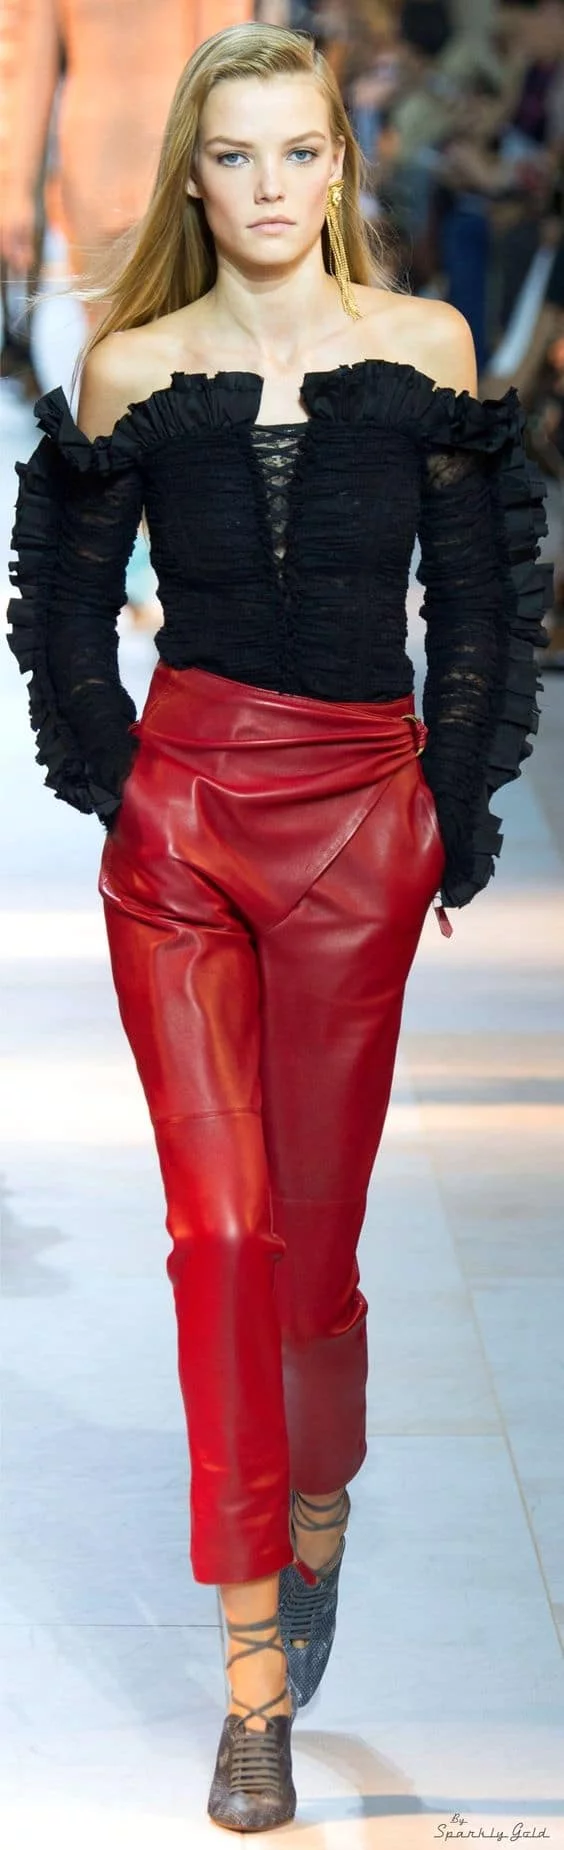 outfit with red leather pants and black chiffon top